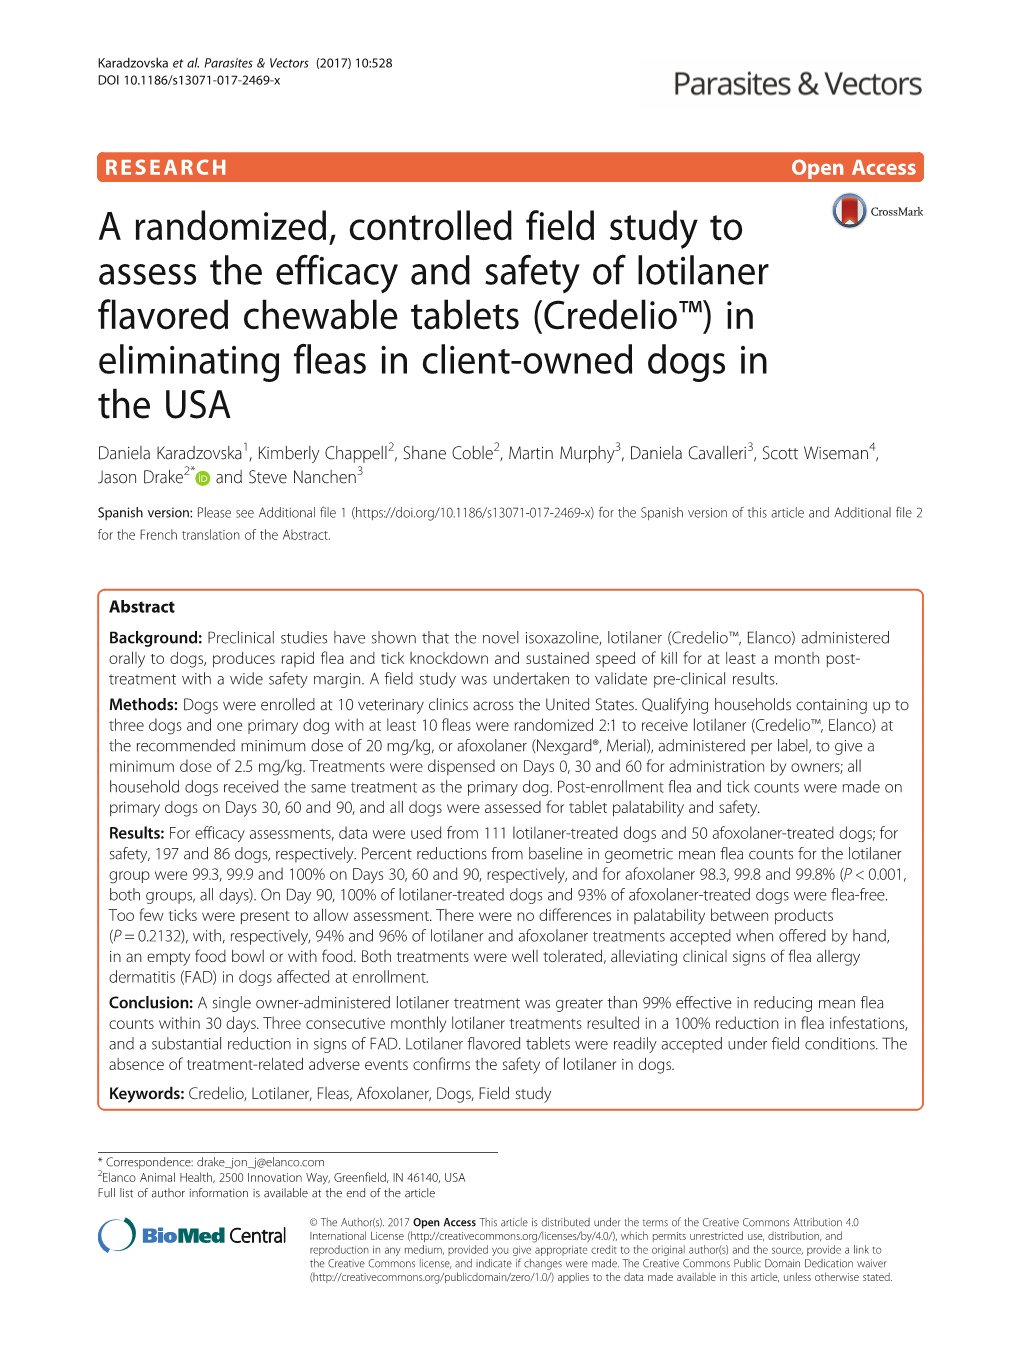 A Randomized, Controlled Field Study to Assess the Efficacy and Safety Of